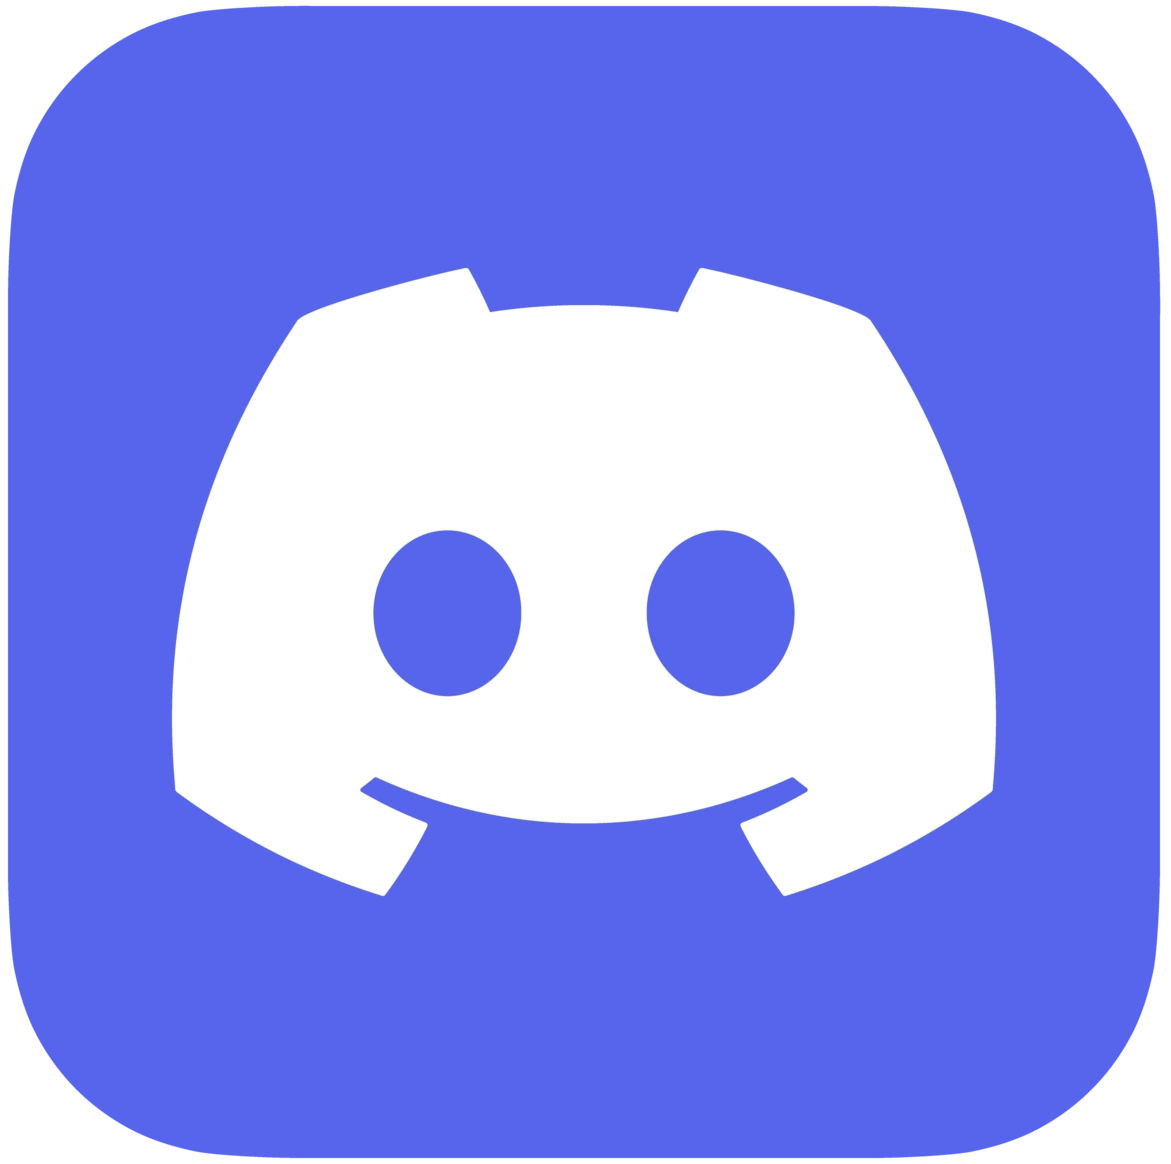 Join the Discord!